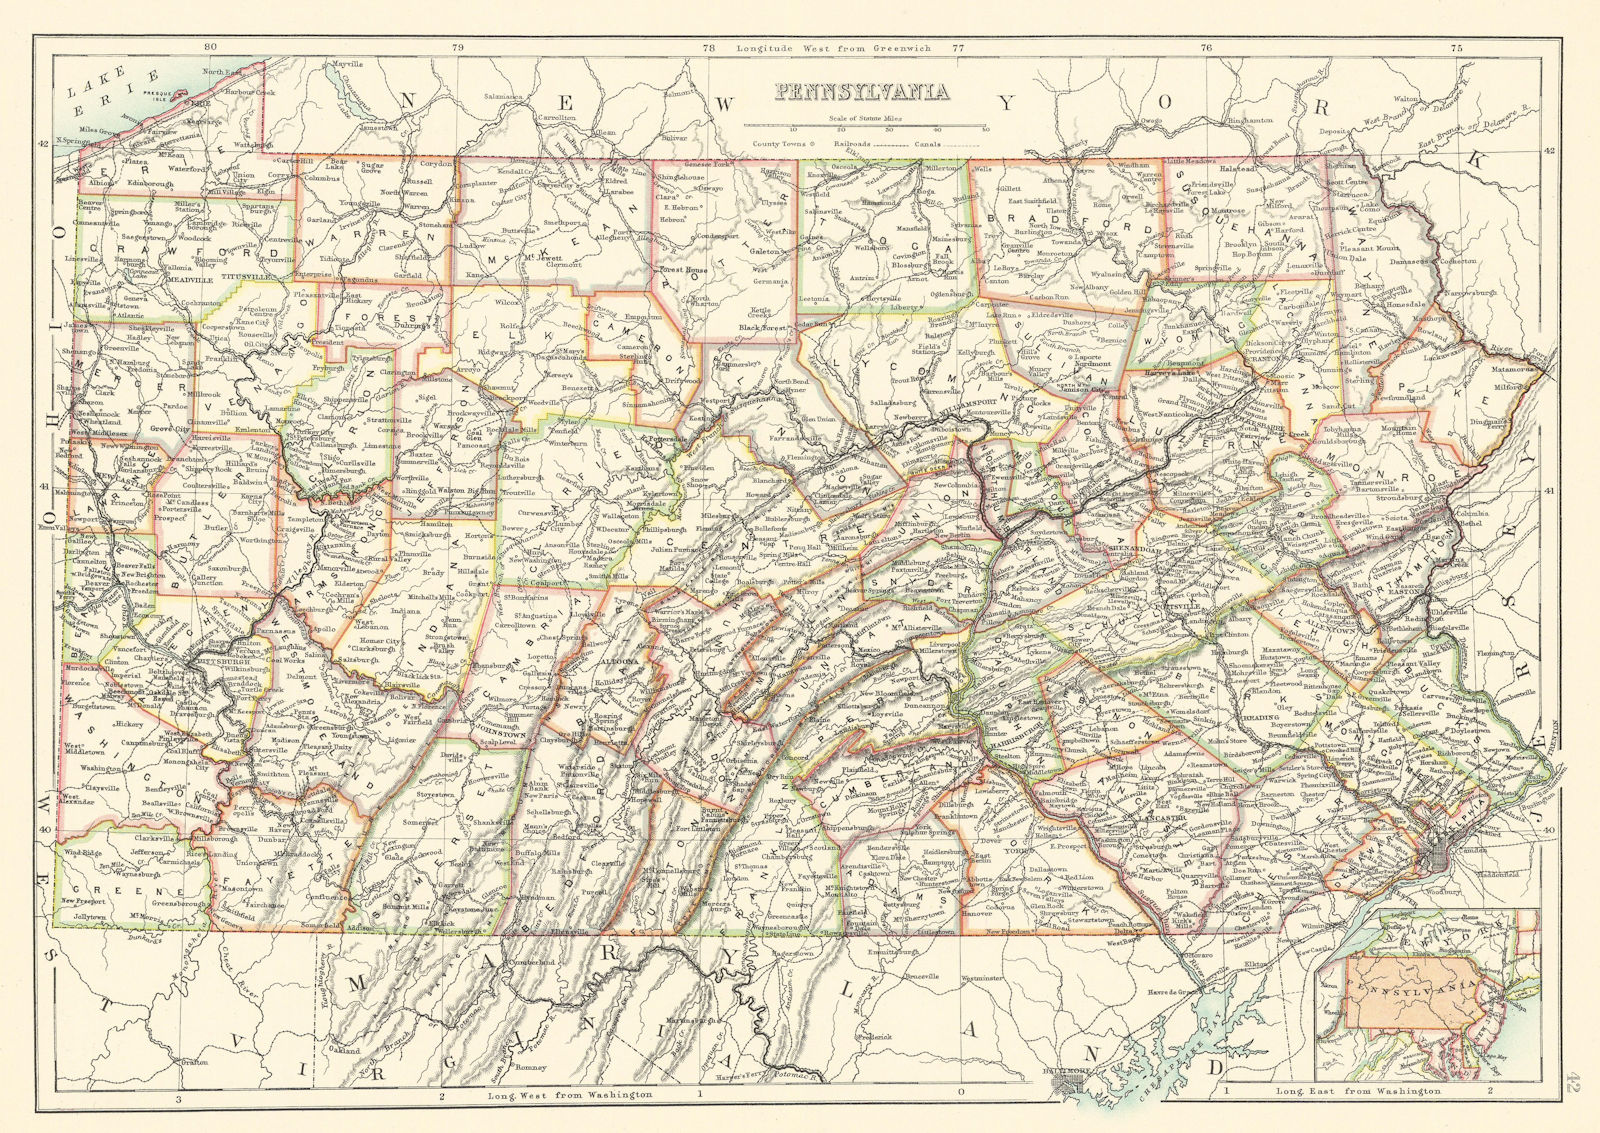 Associate Product Pennsylvania state map showing counties. BARTHOLOMEW 1898 old antique